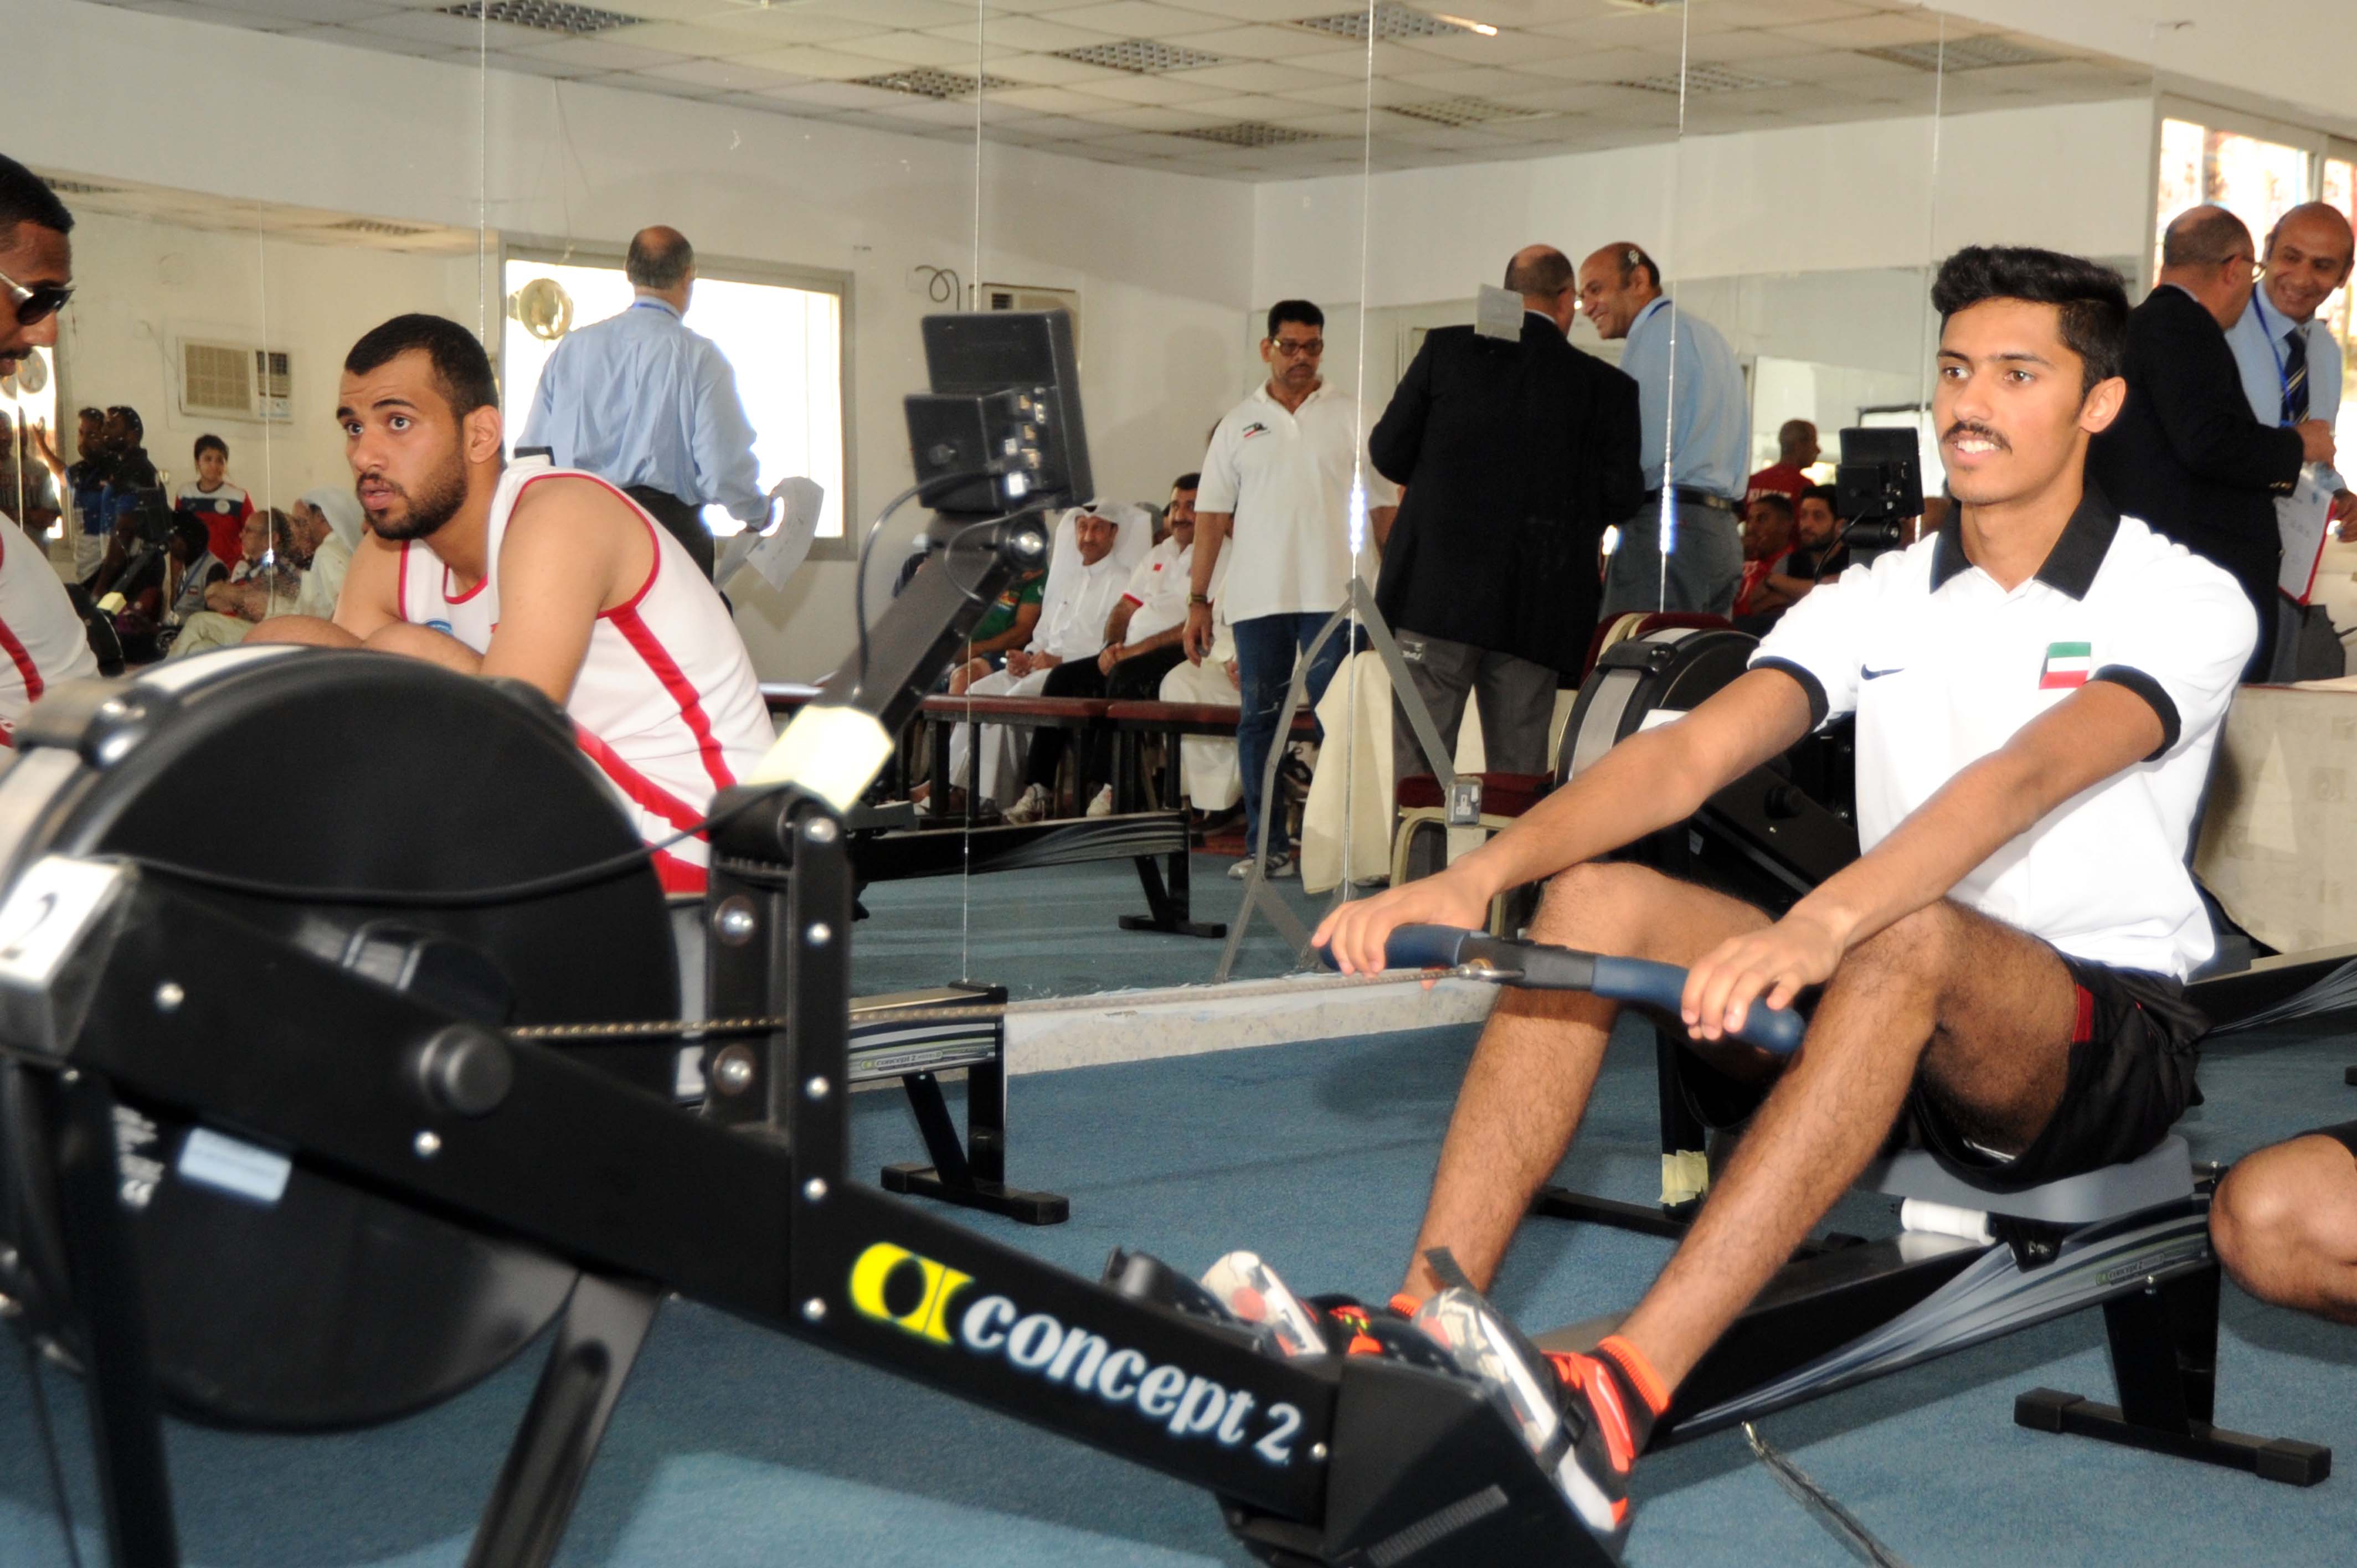 Stiff competition at Arab rowing tourney